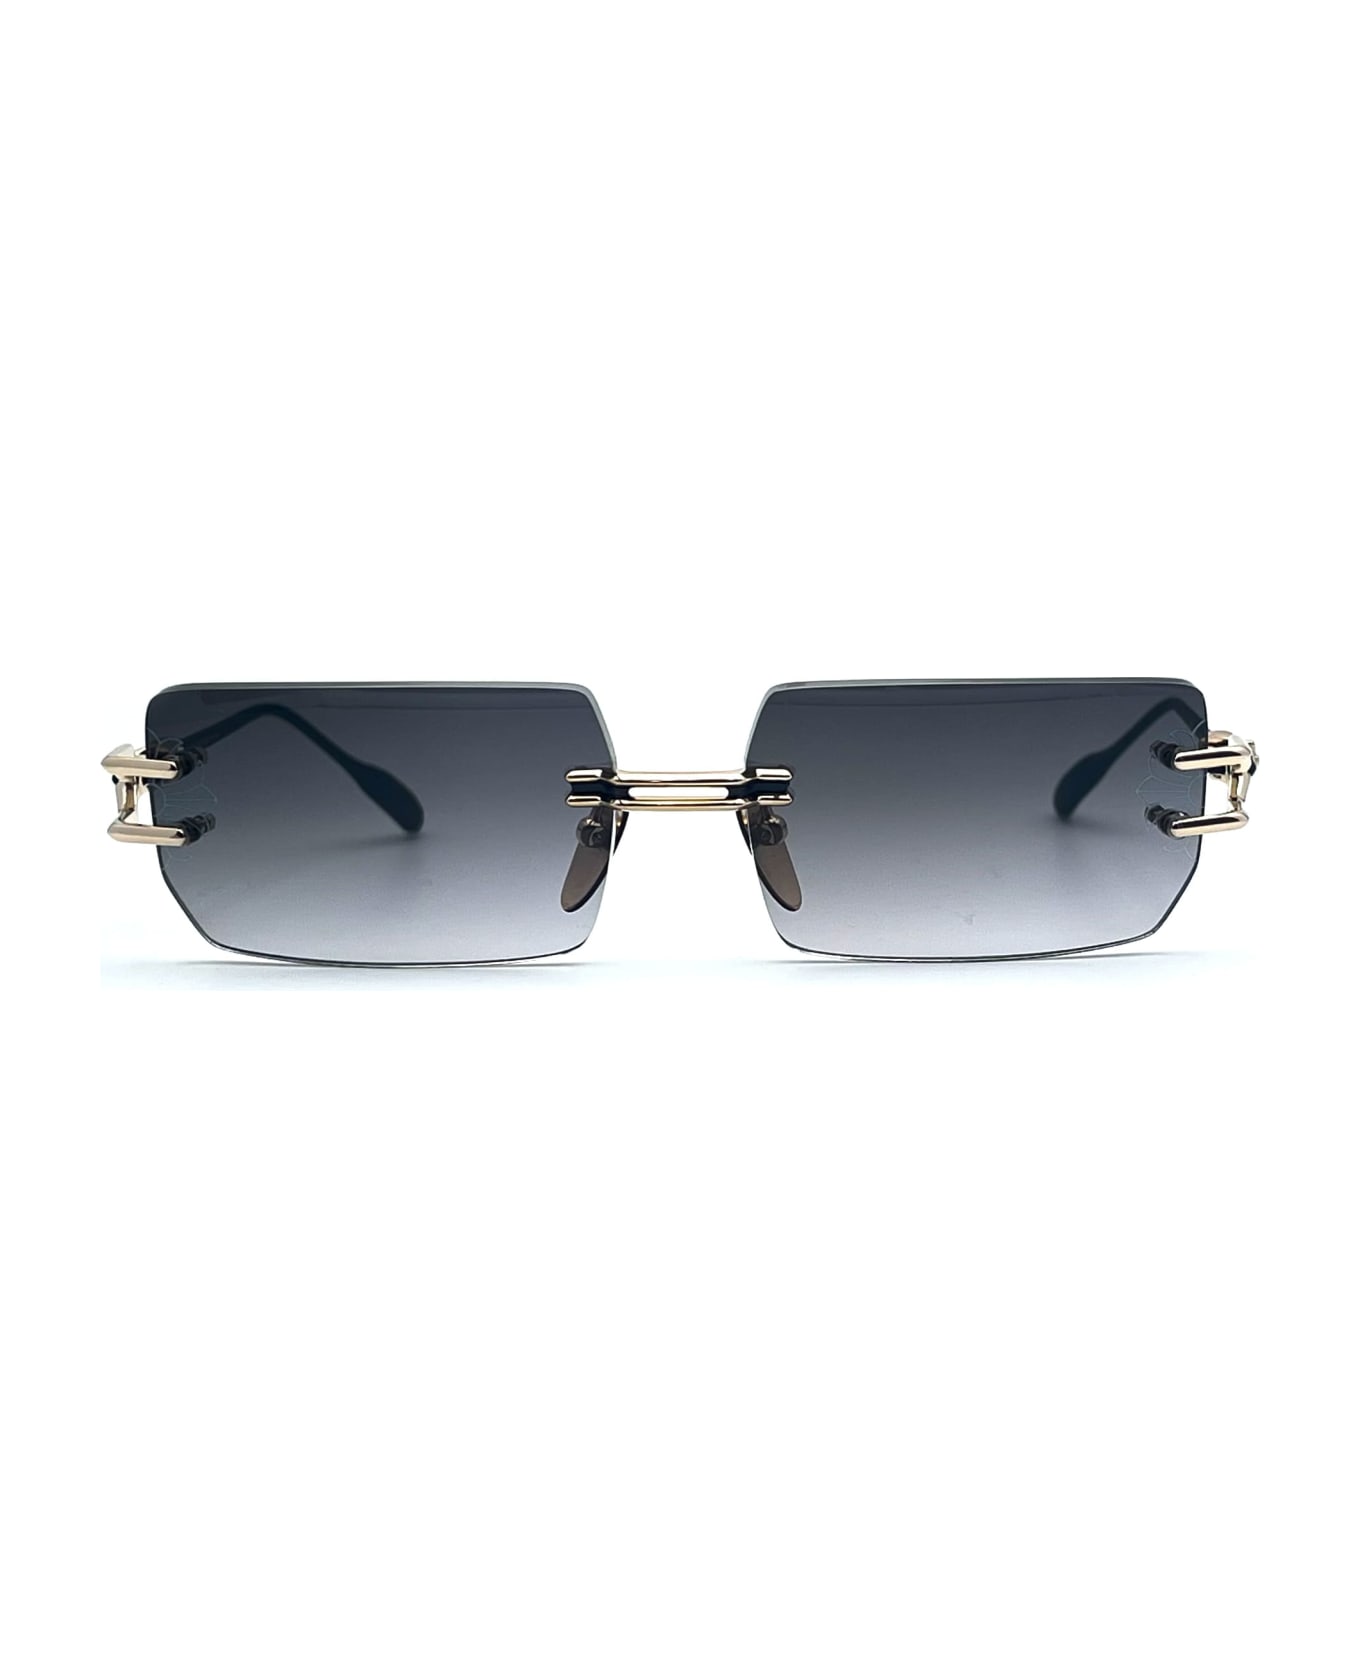 Chrome Hearts Lordie - Gold Plated / Matte Black Sunglasses - Black/gold